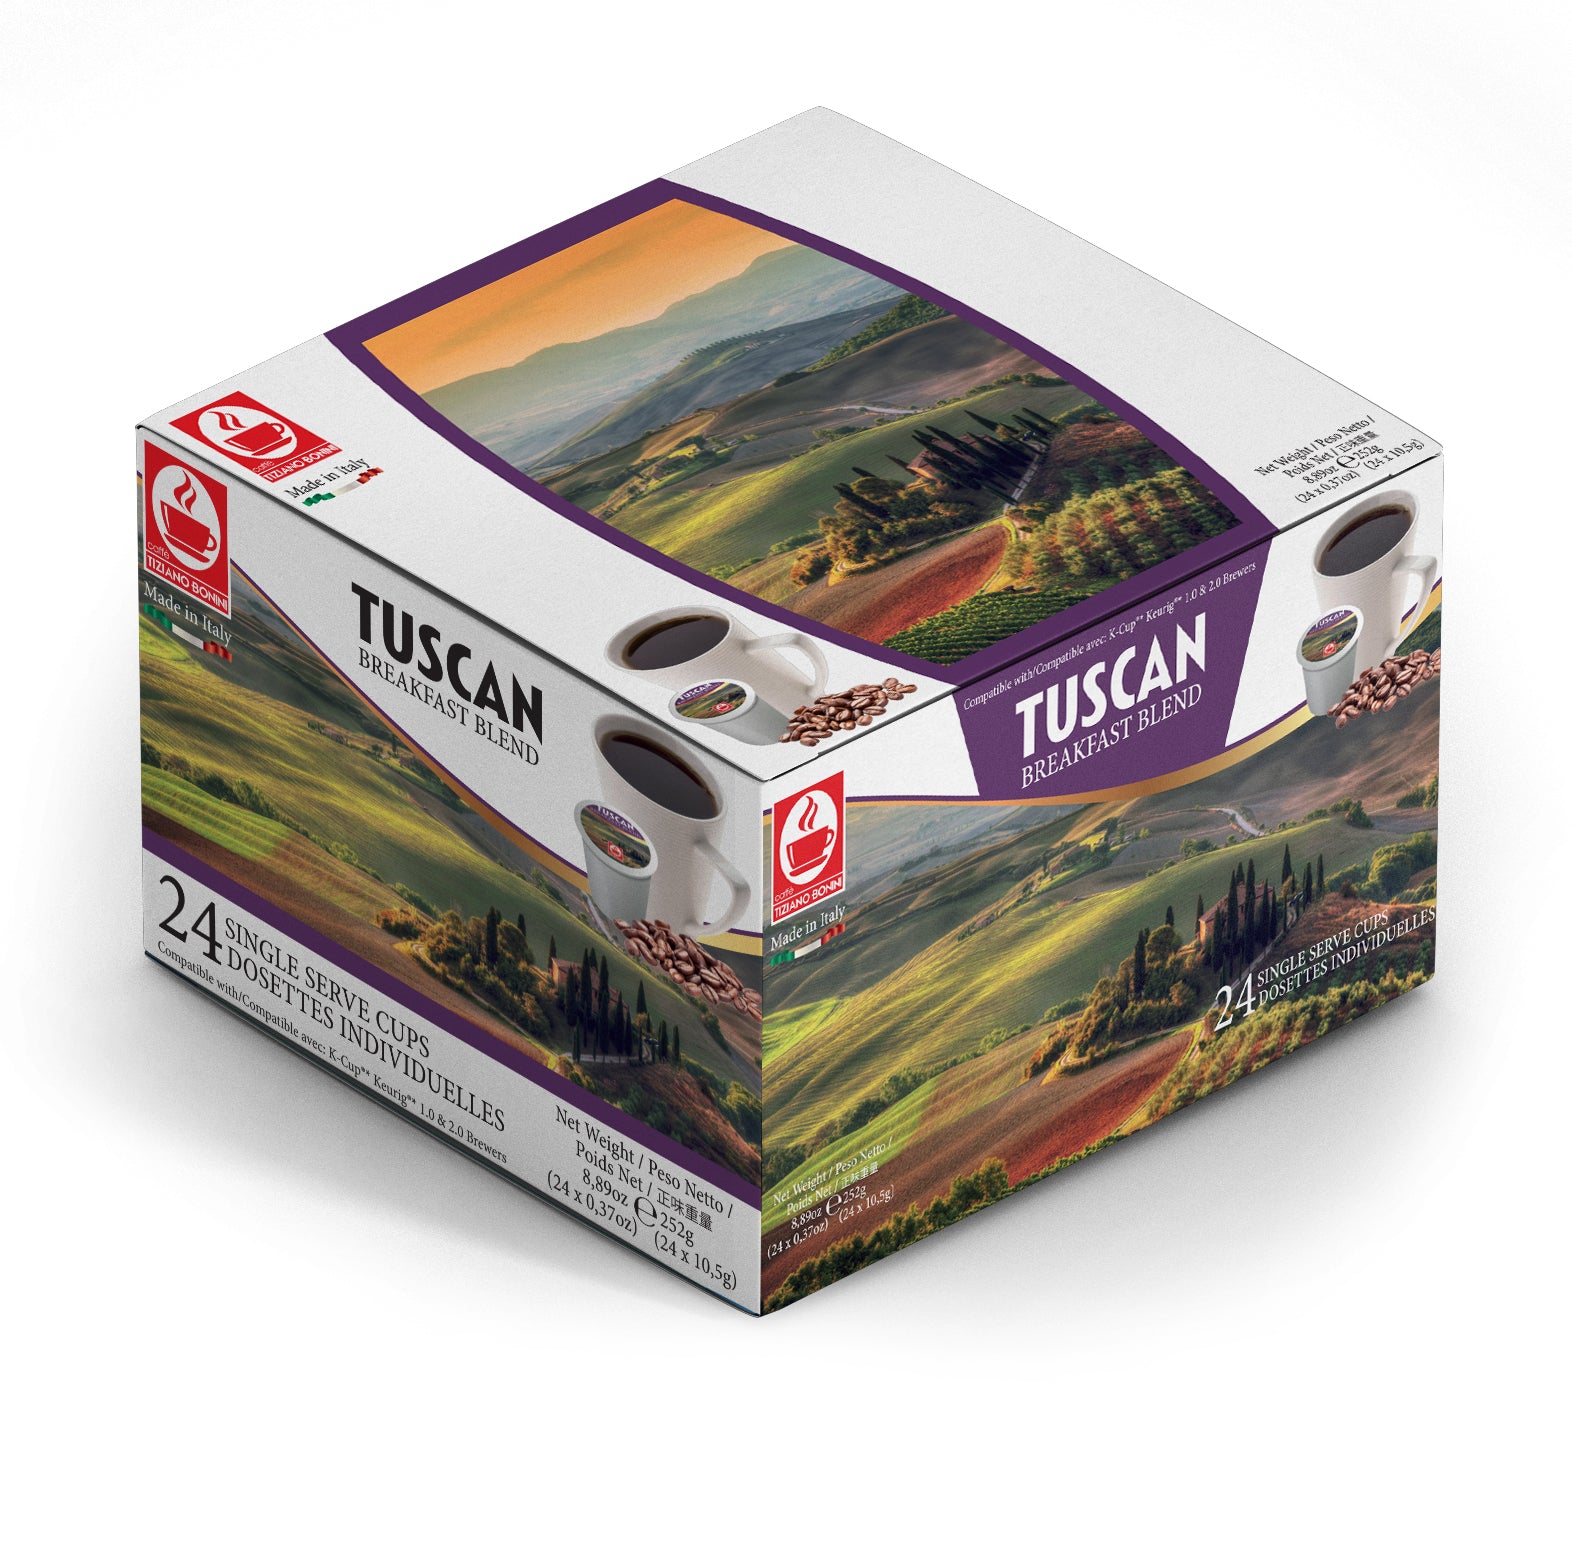 Tiziano Bonini Tuscan Keurig K-Cup Compatible Pods - 24 Pack